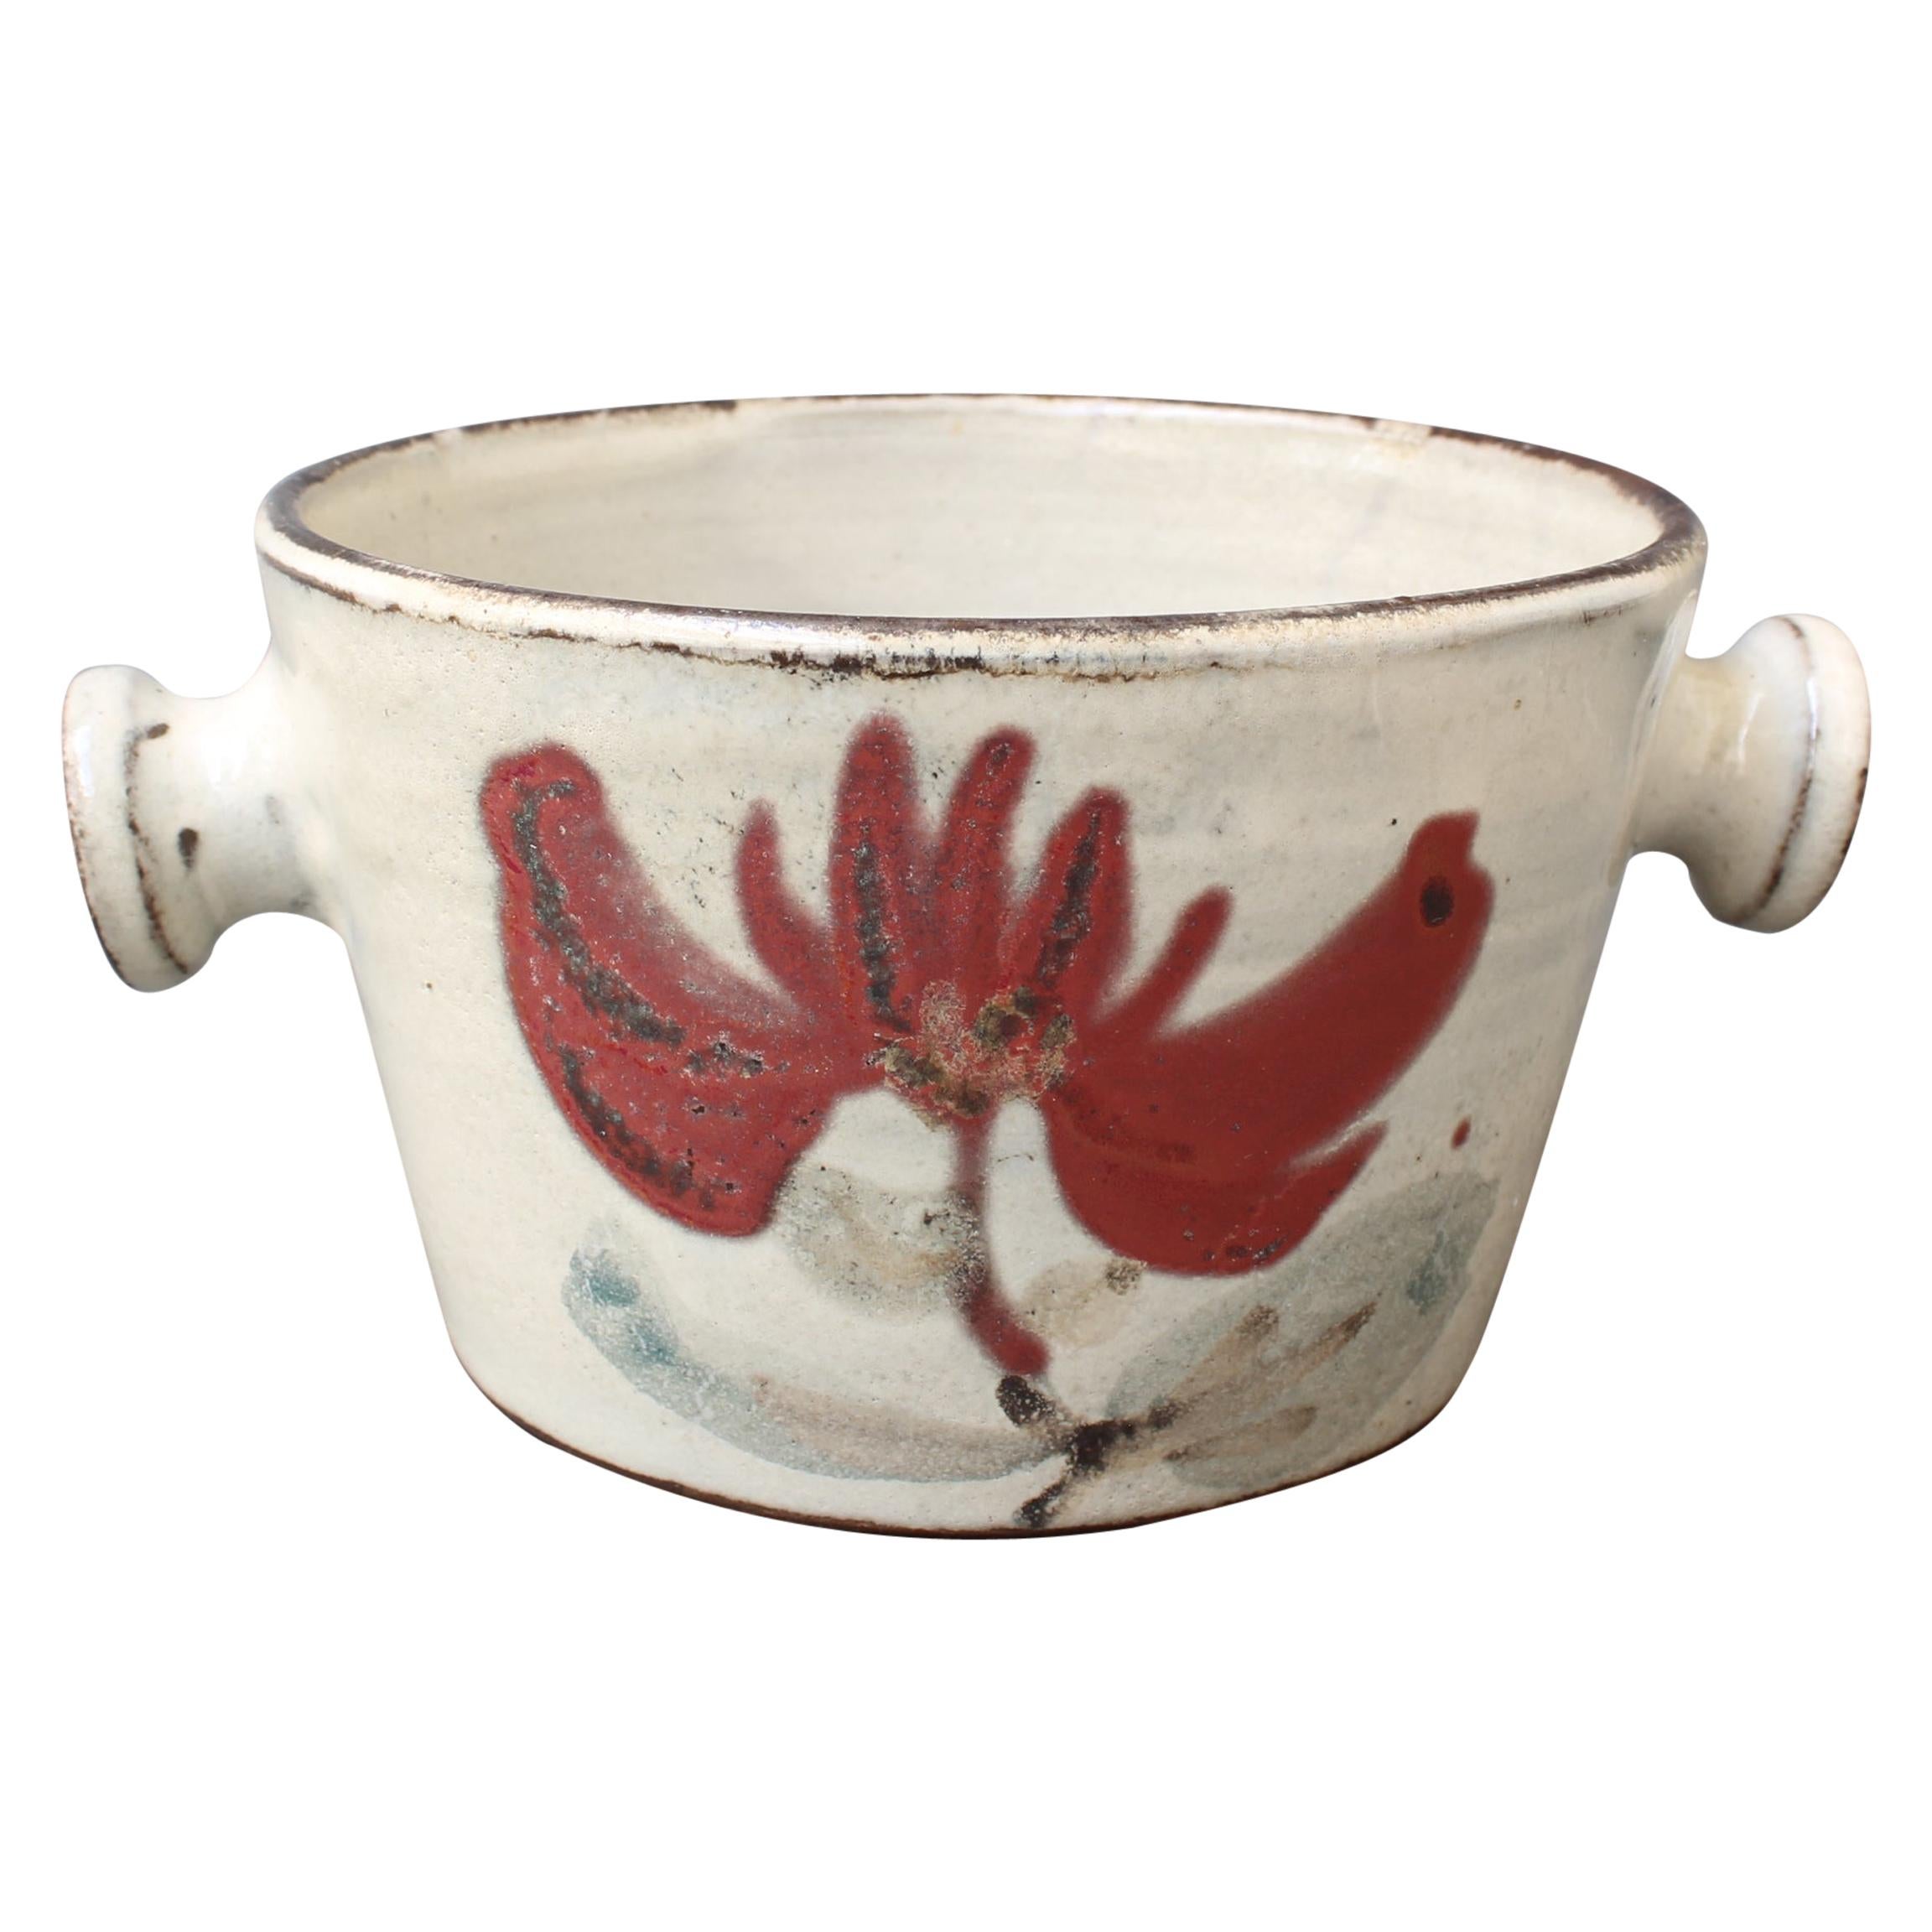 Small Ceramic Crockery Pot by Gustave Reynaud for Le Mûrier, circa 1950s